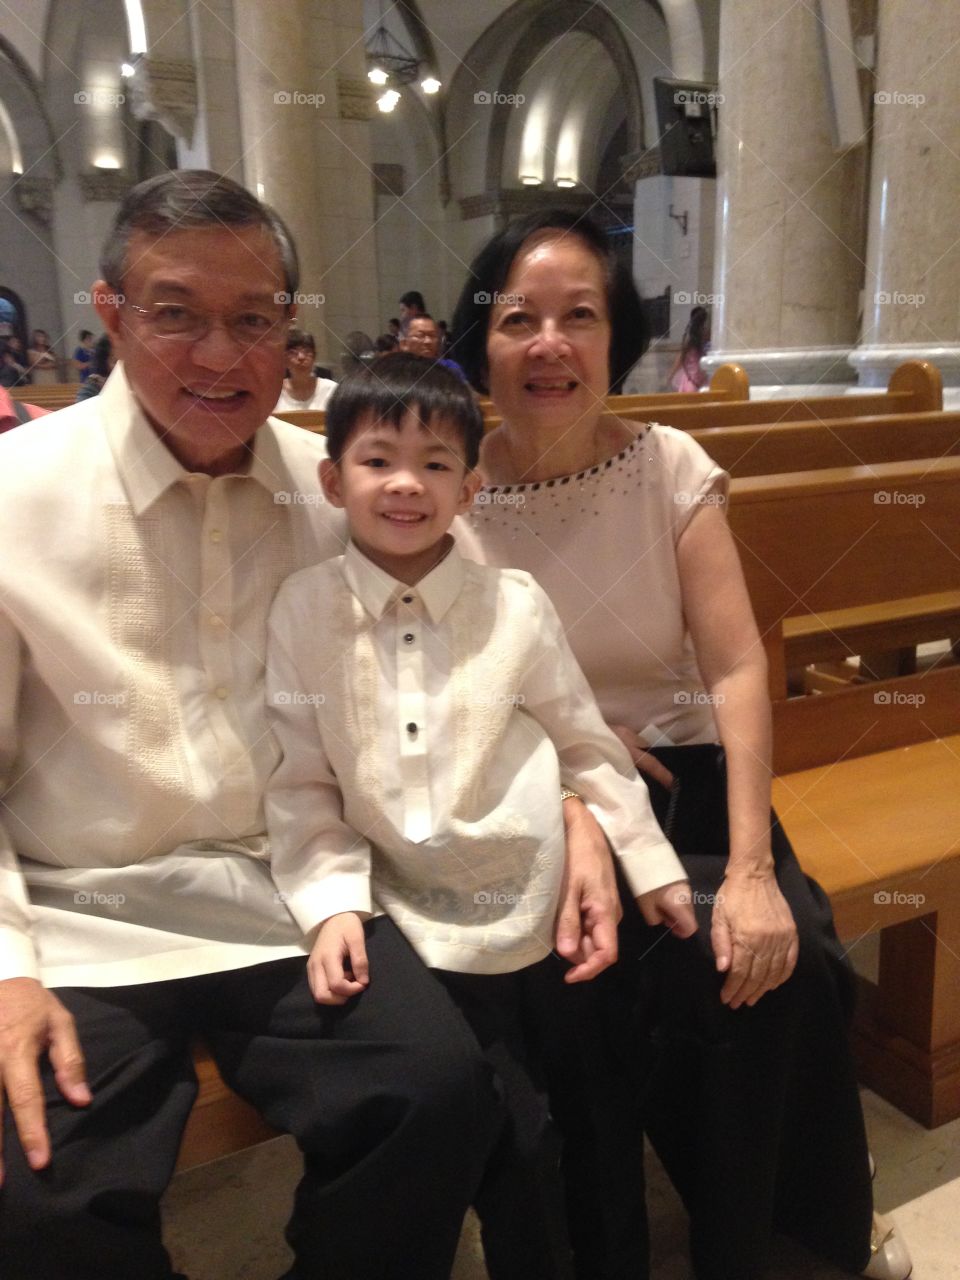 my wife and grandson  during a wedding inside the cathedral. my grandson was the coin bearer in the wedding